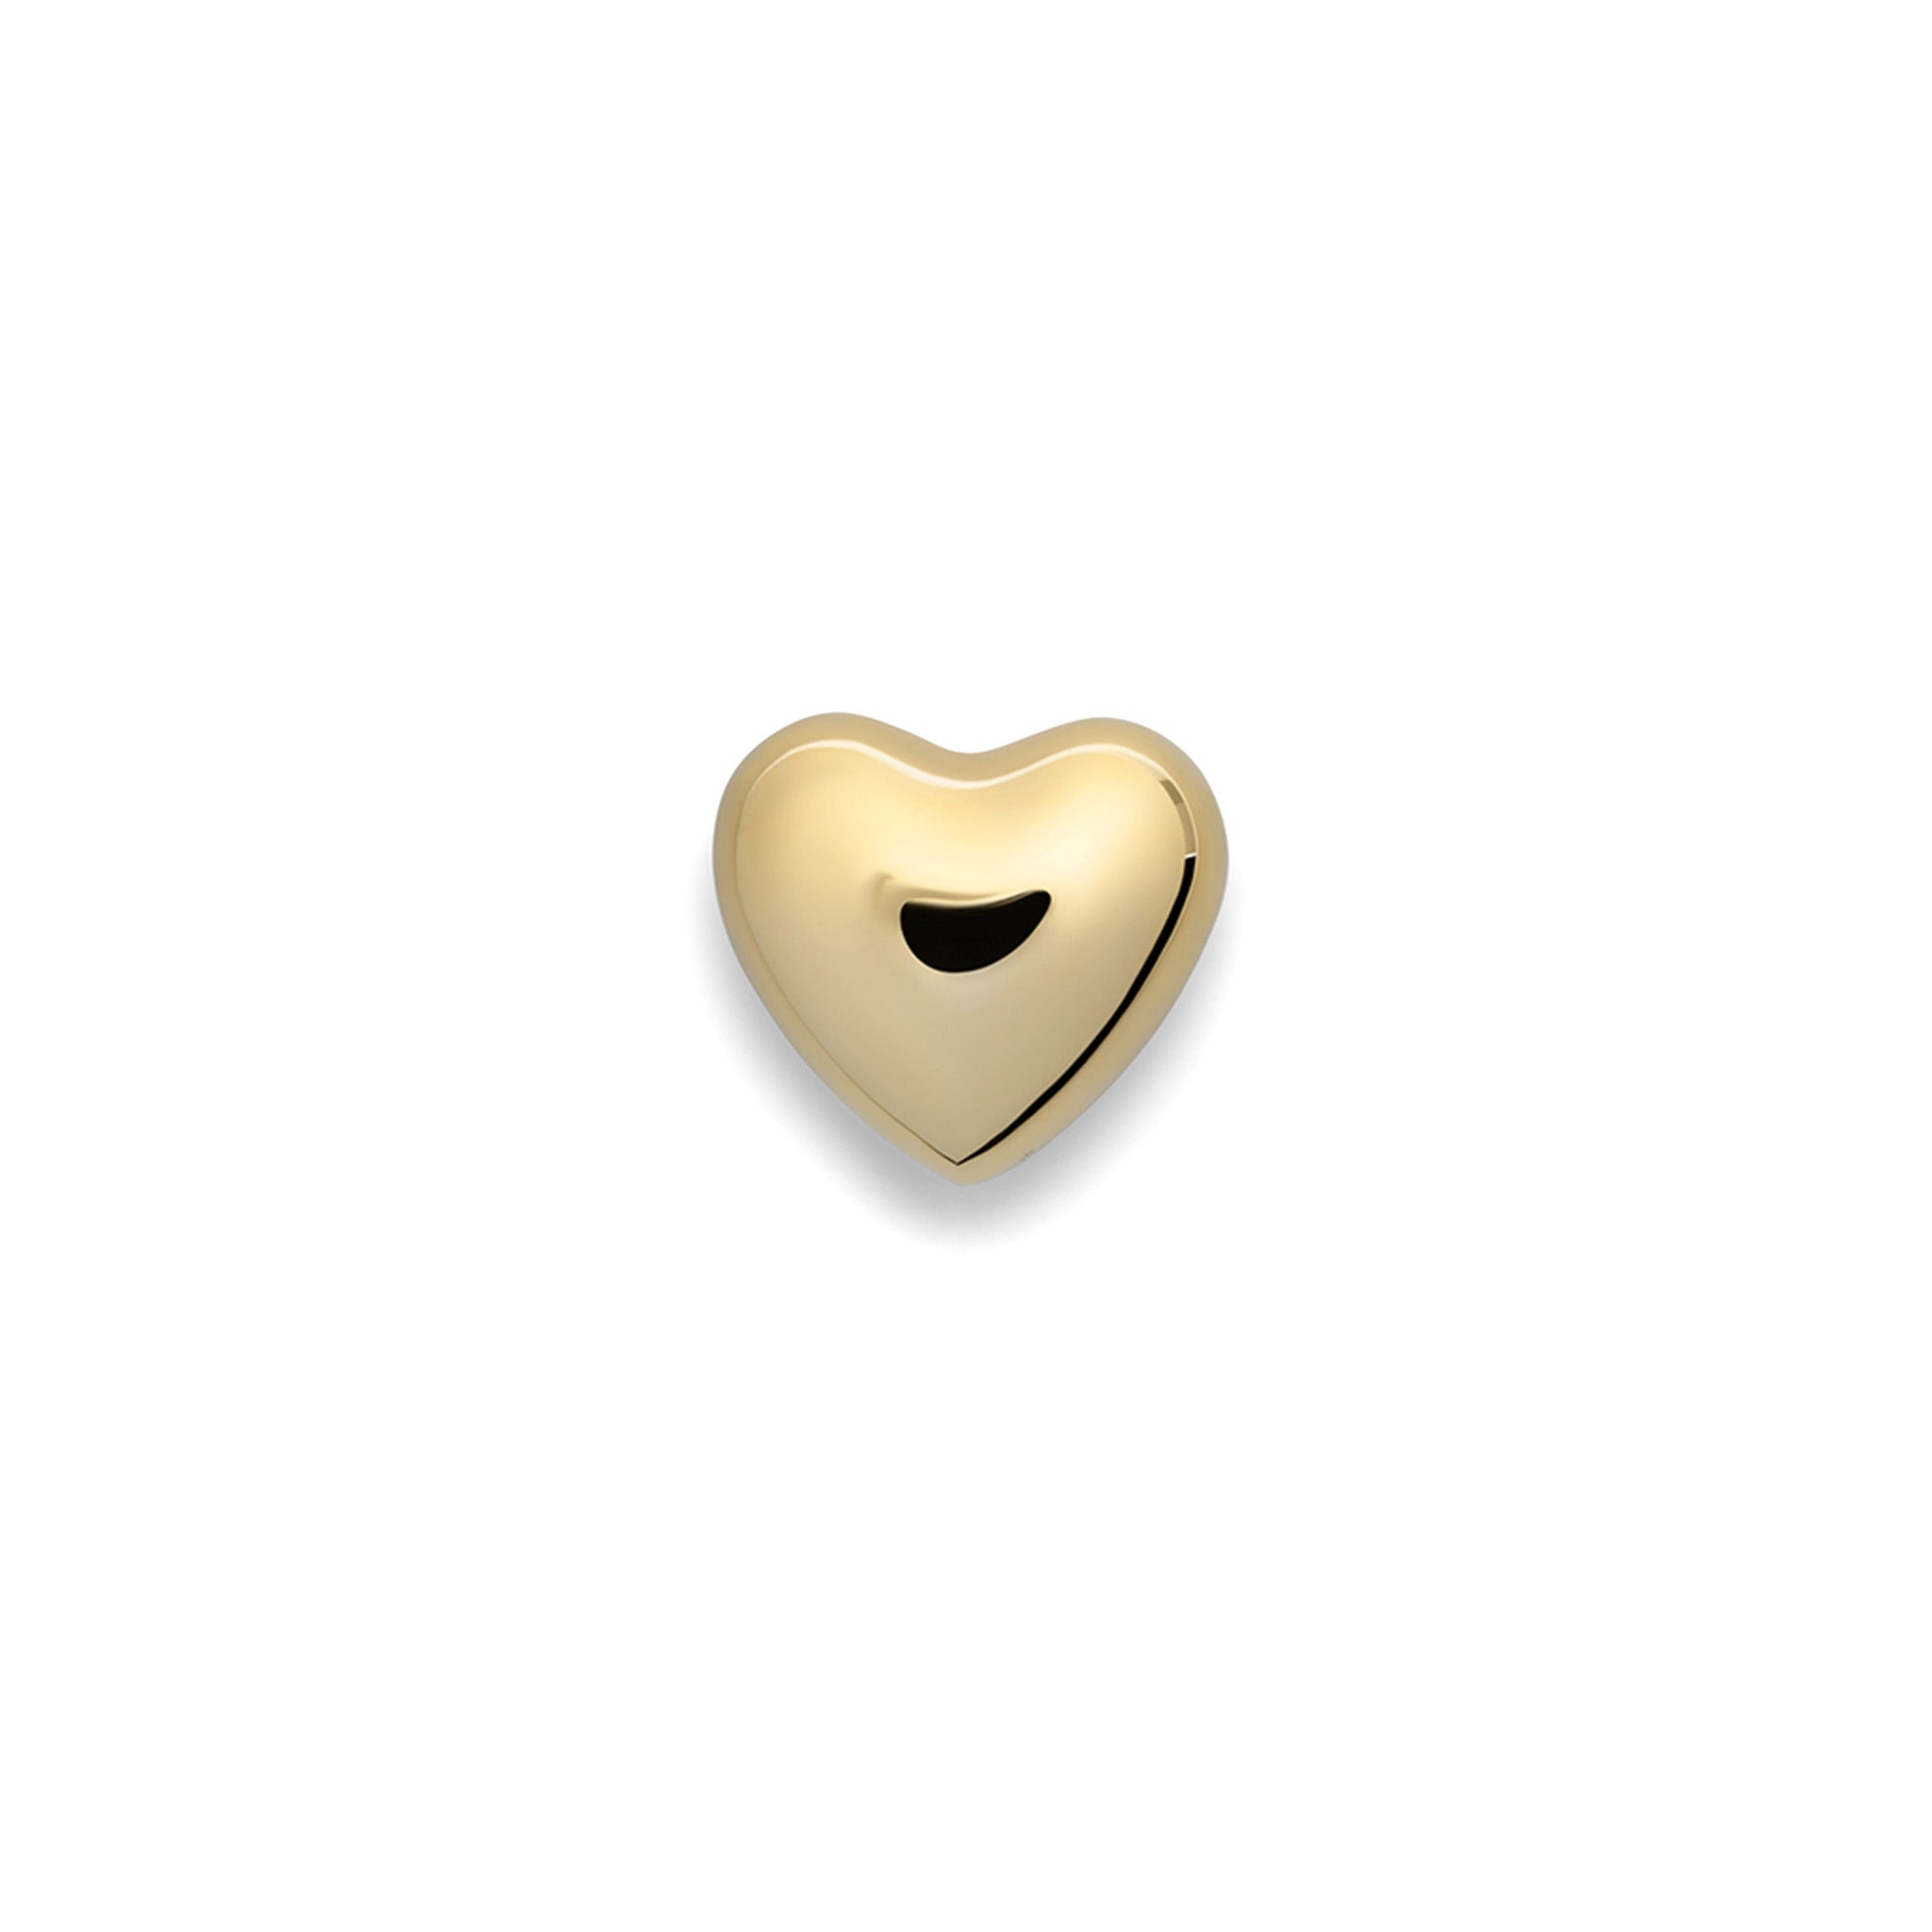 a gold heart shaped paperweight on a white background